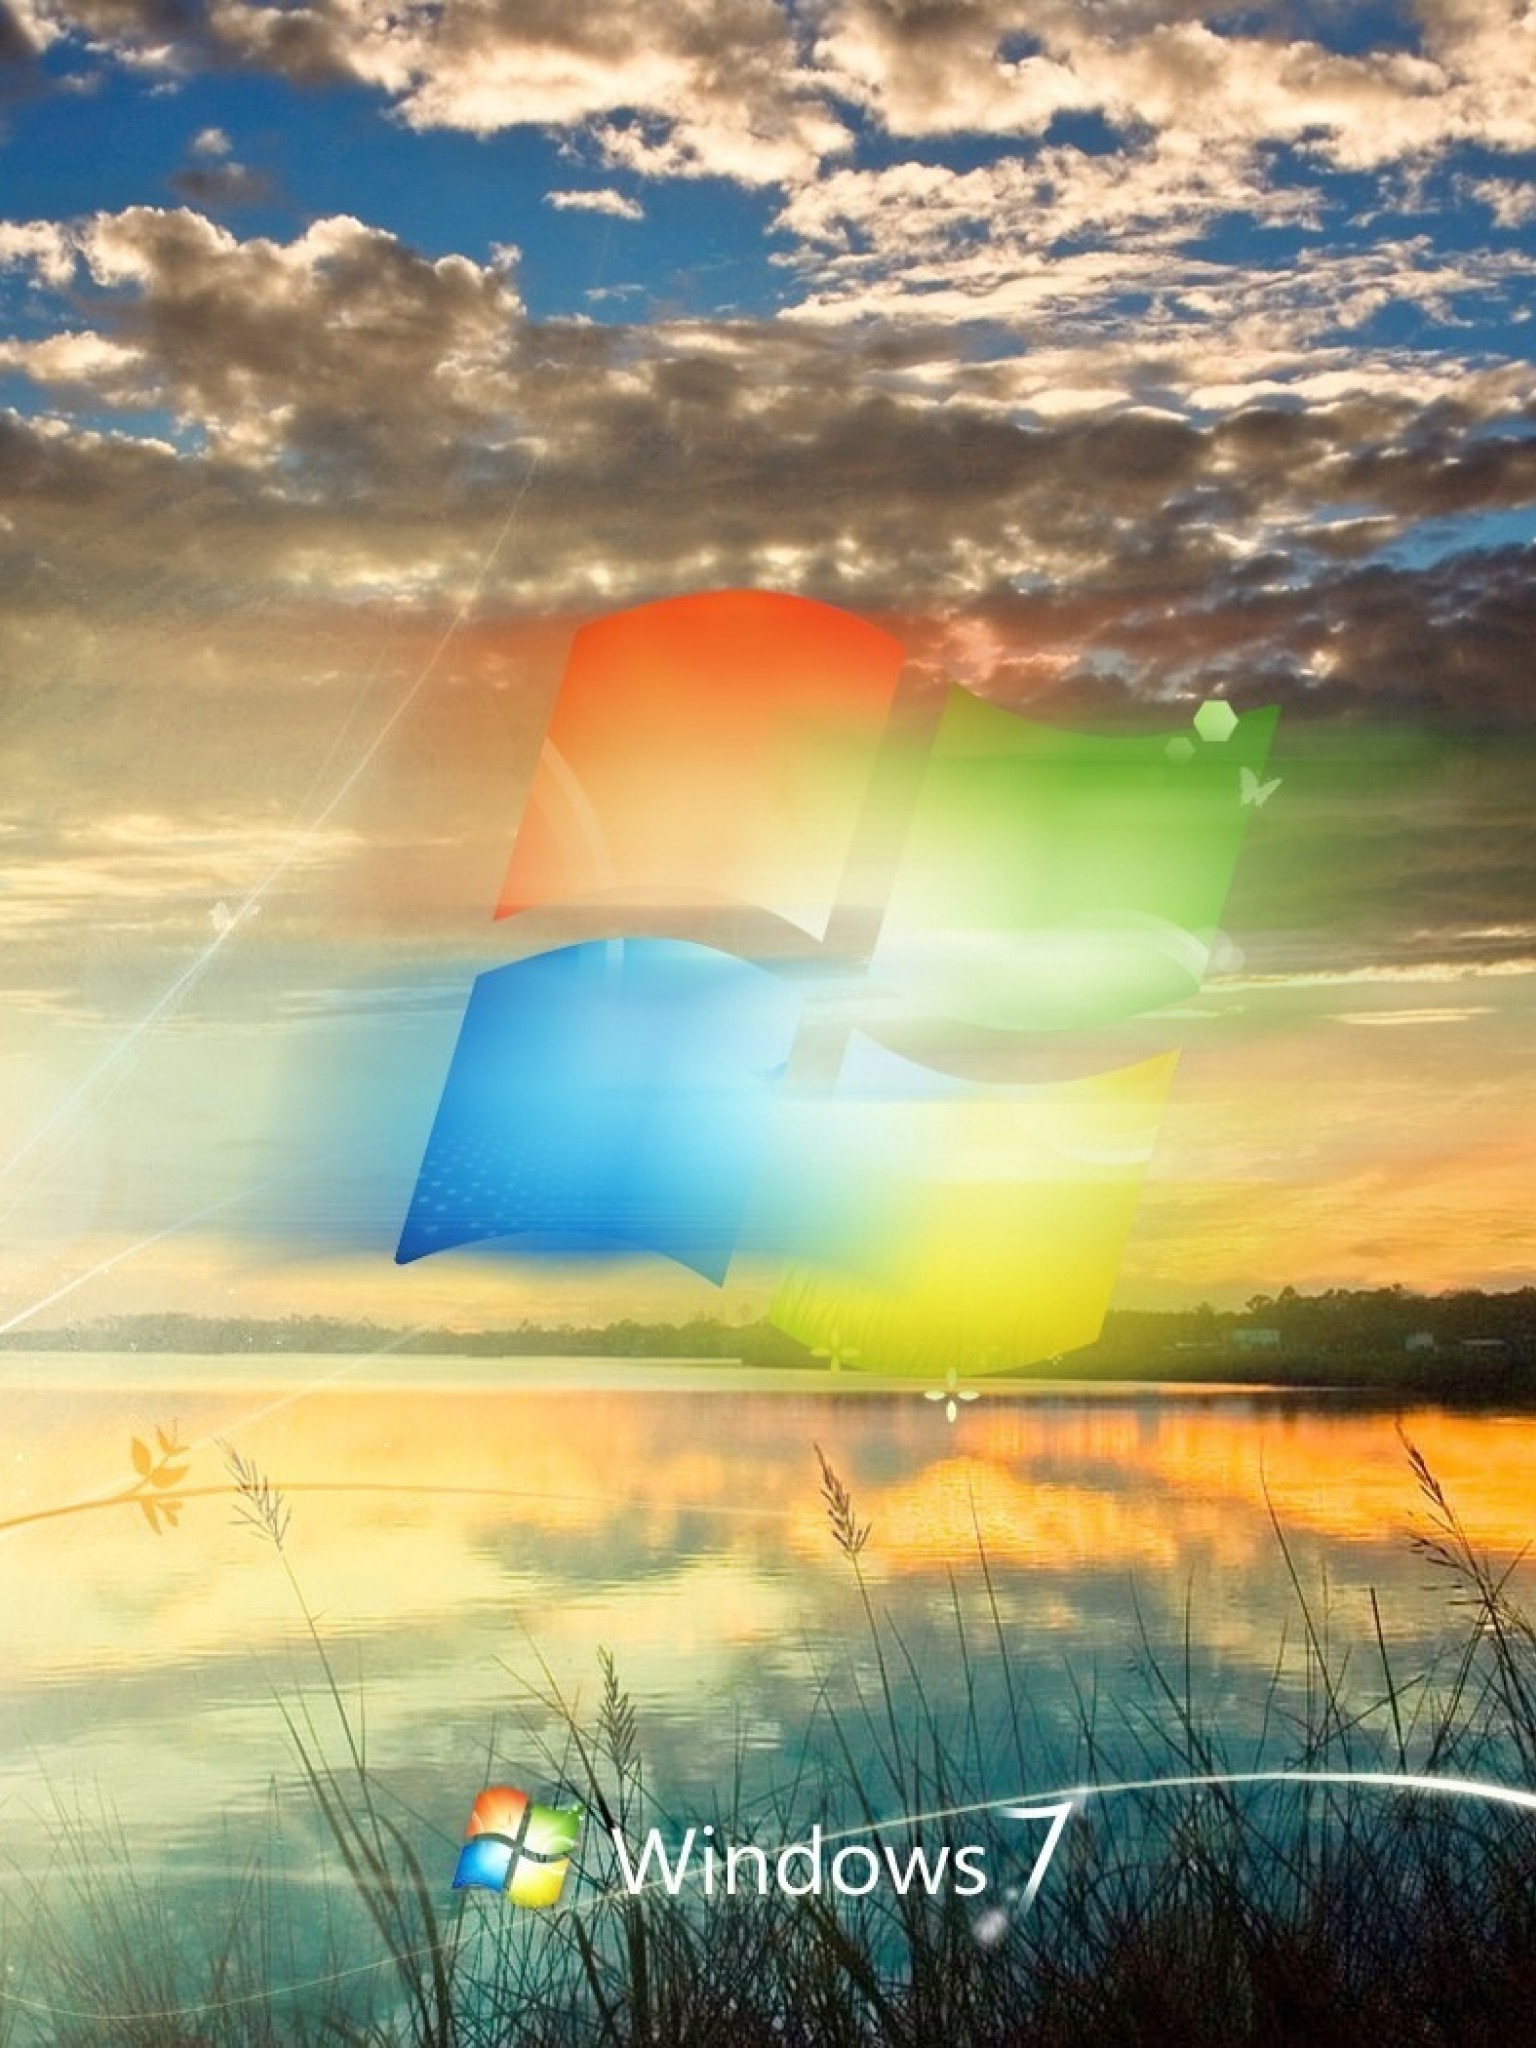 Windows 7 covered in clouds HD Wallpaper